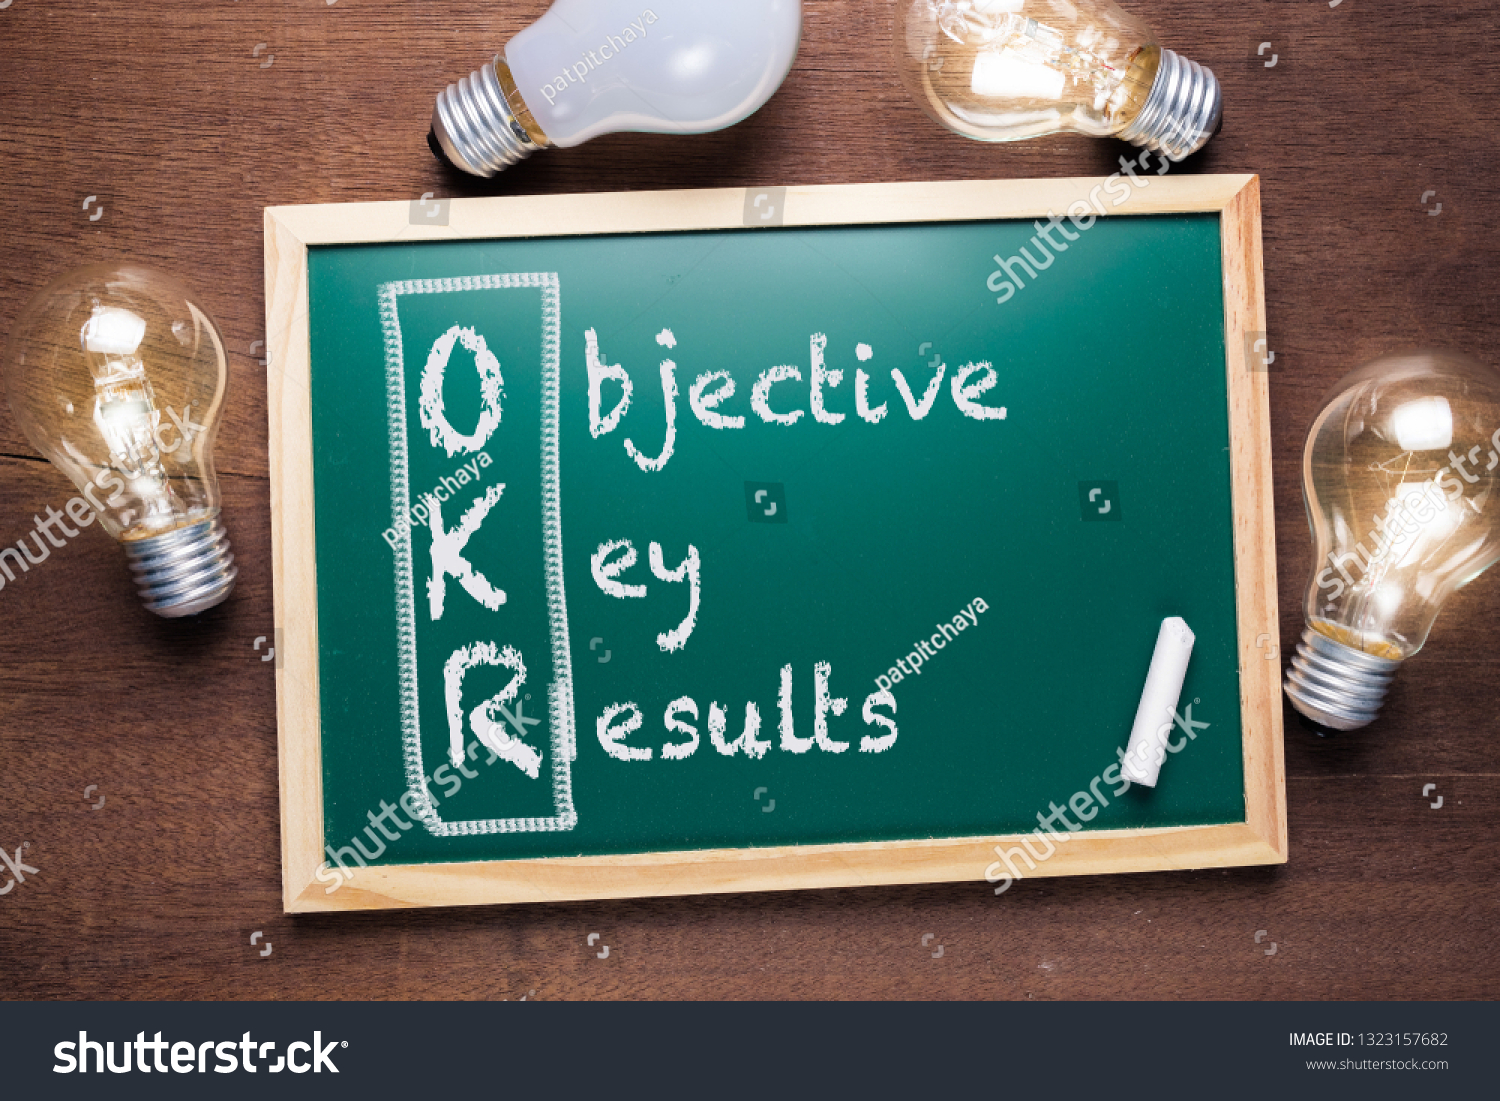 OKR or Objective Key Results acronym text on chalkboard with many glowing light bulbs #1323157682